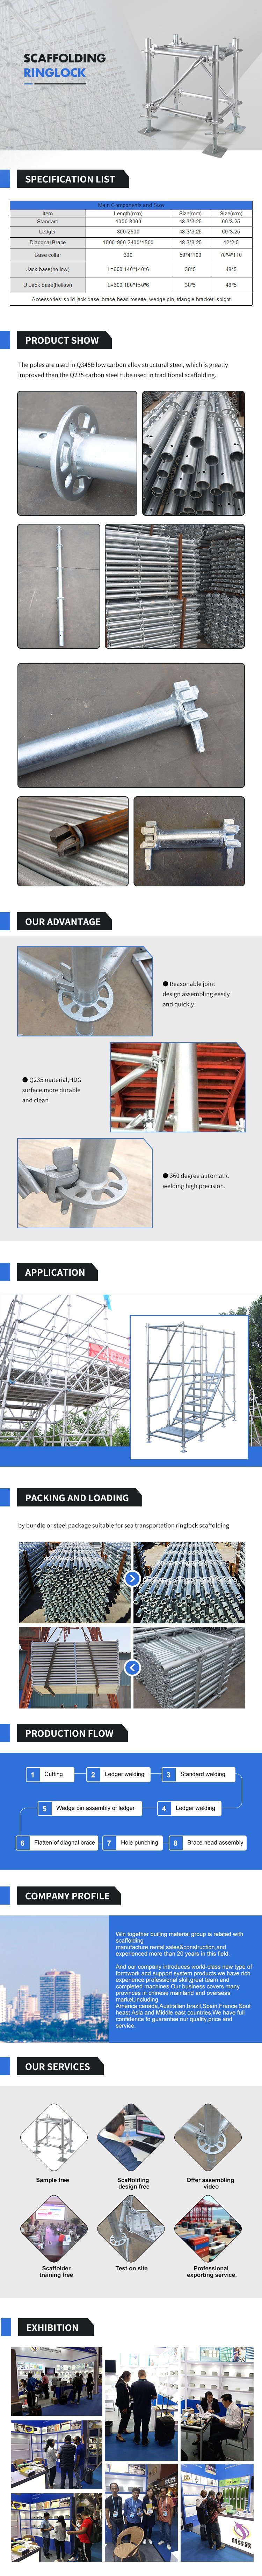 Complete Details About Access Cuplock Scaffolding for Construction Material